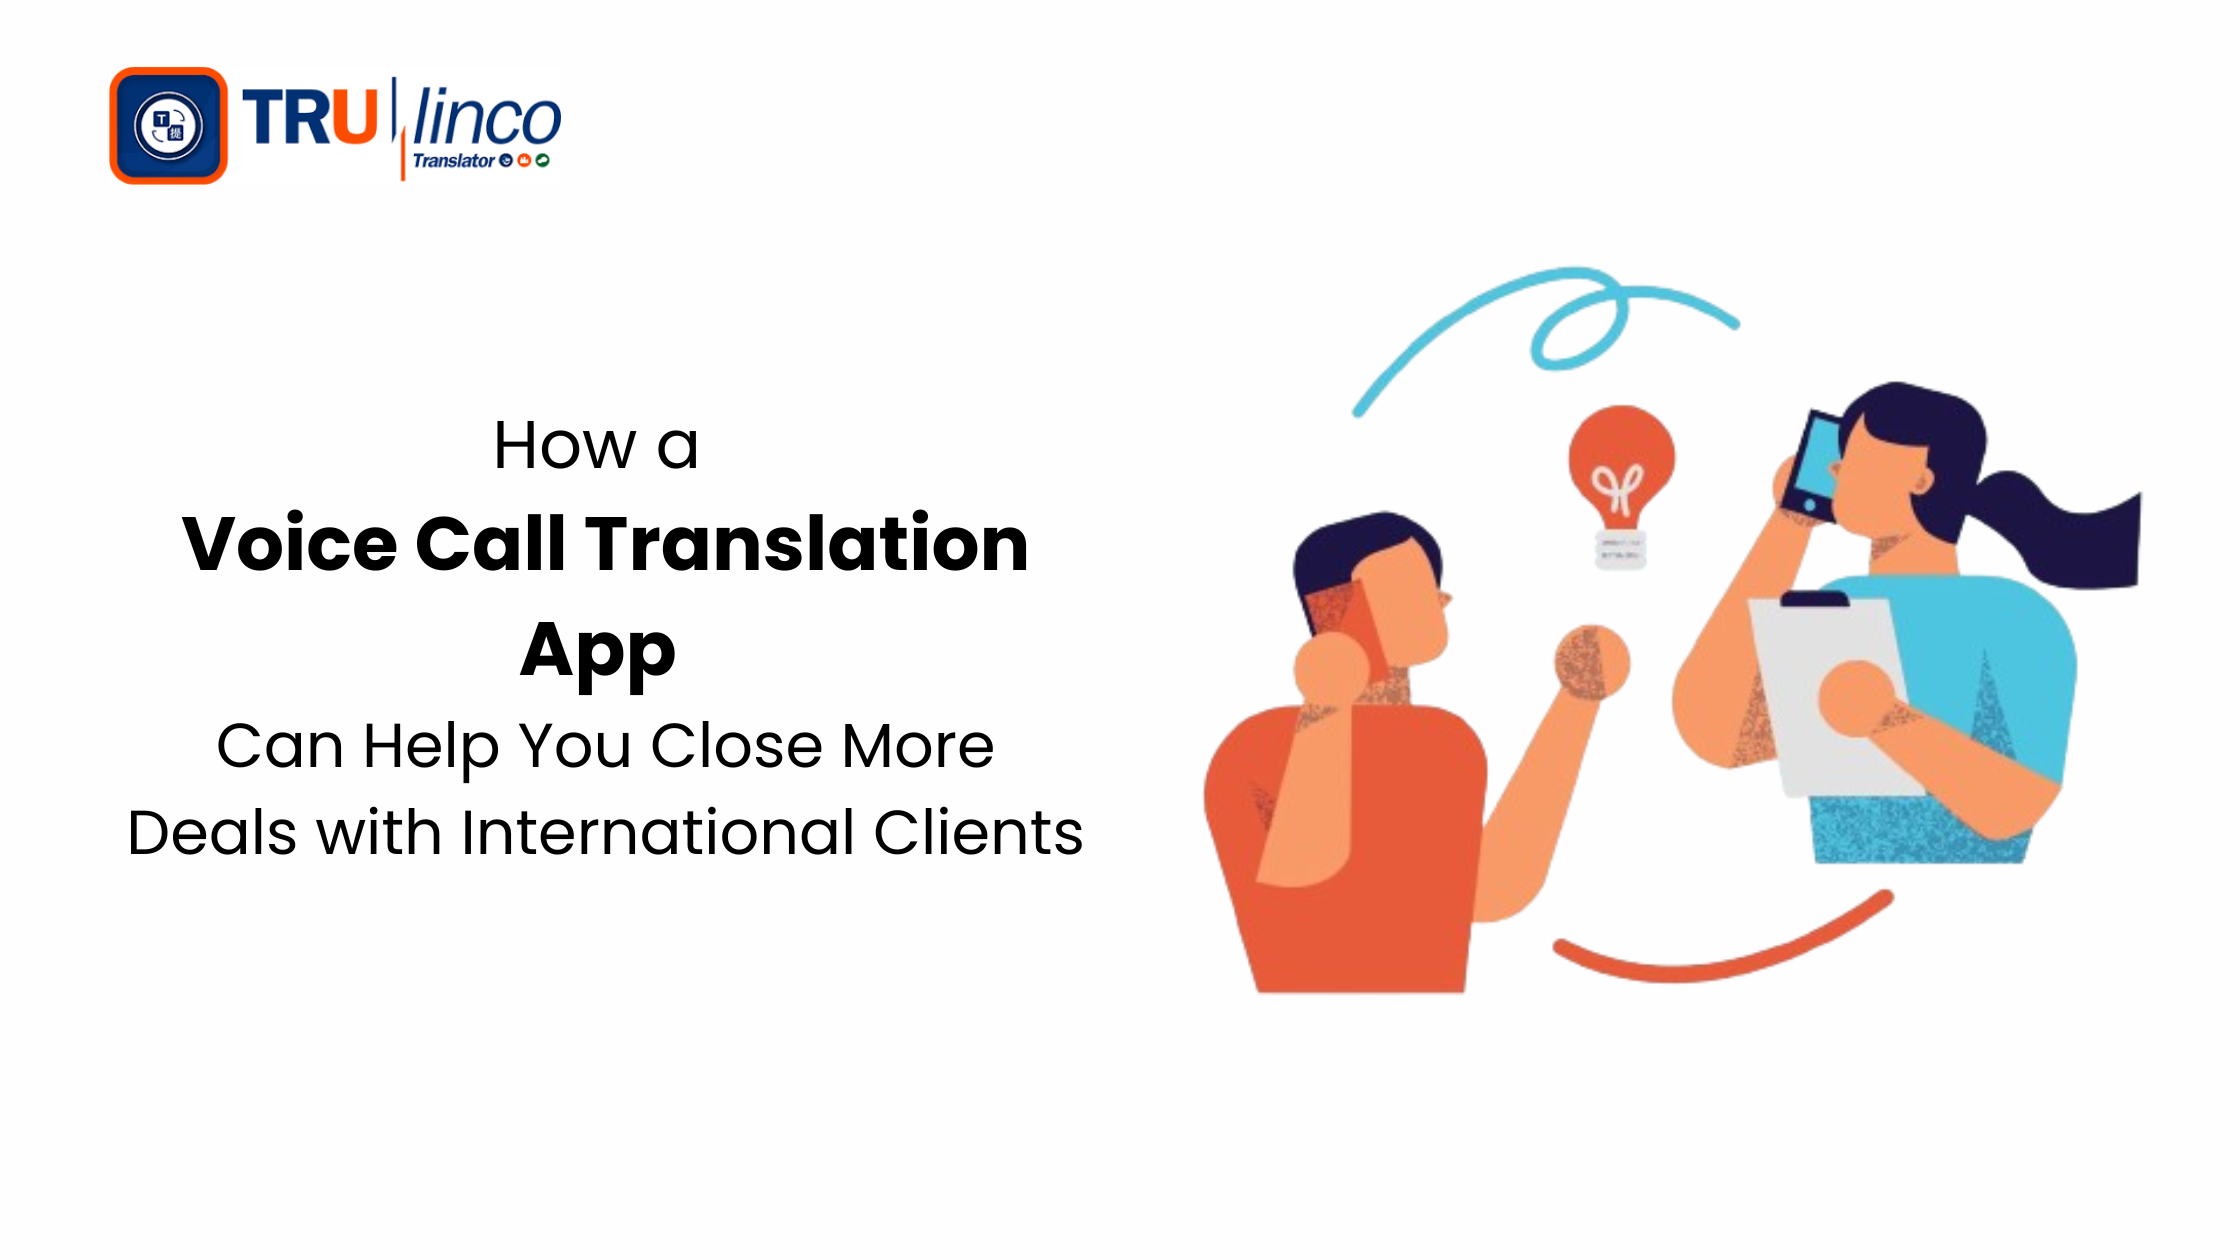 How a Voice Call Translation App Can Help You Close More Deals with International Clients